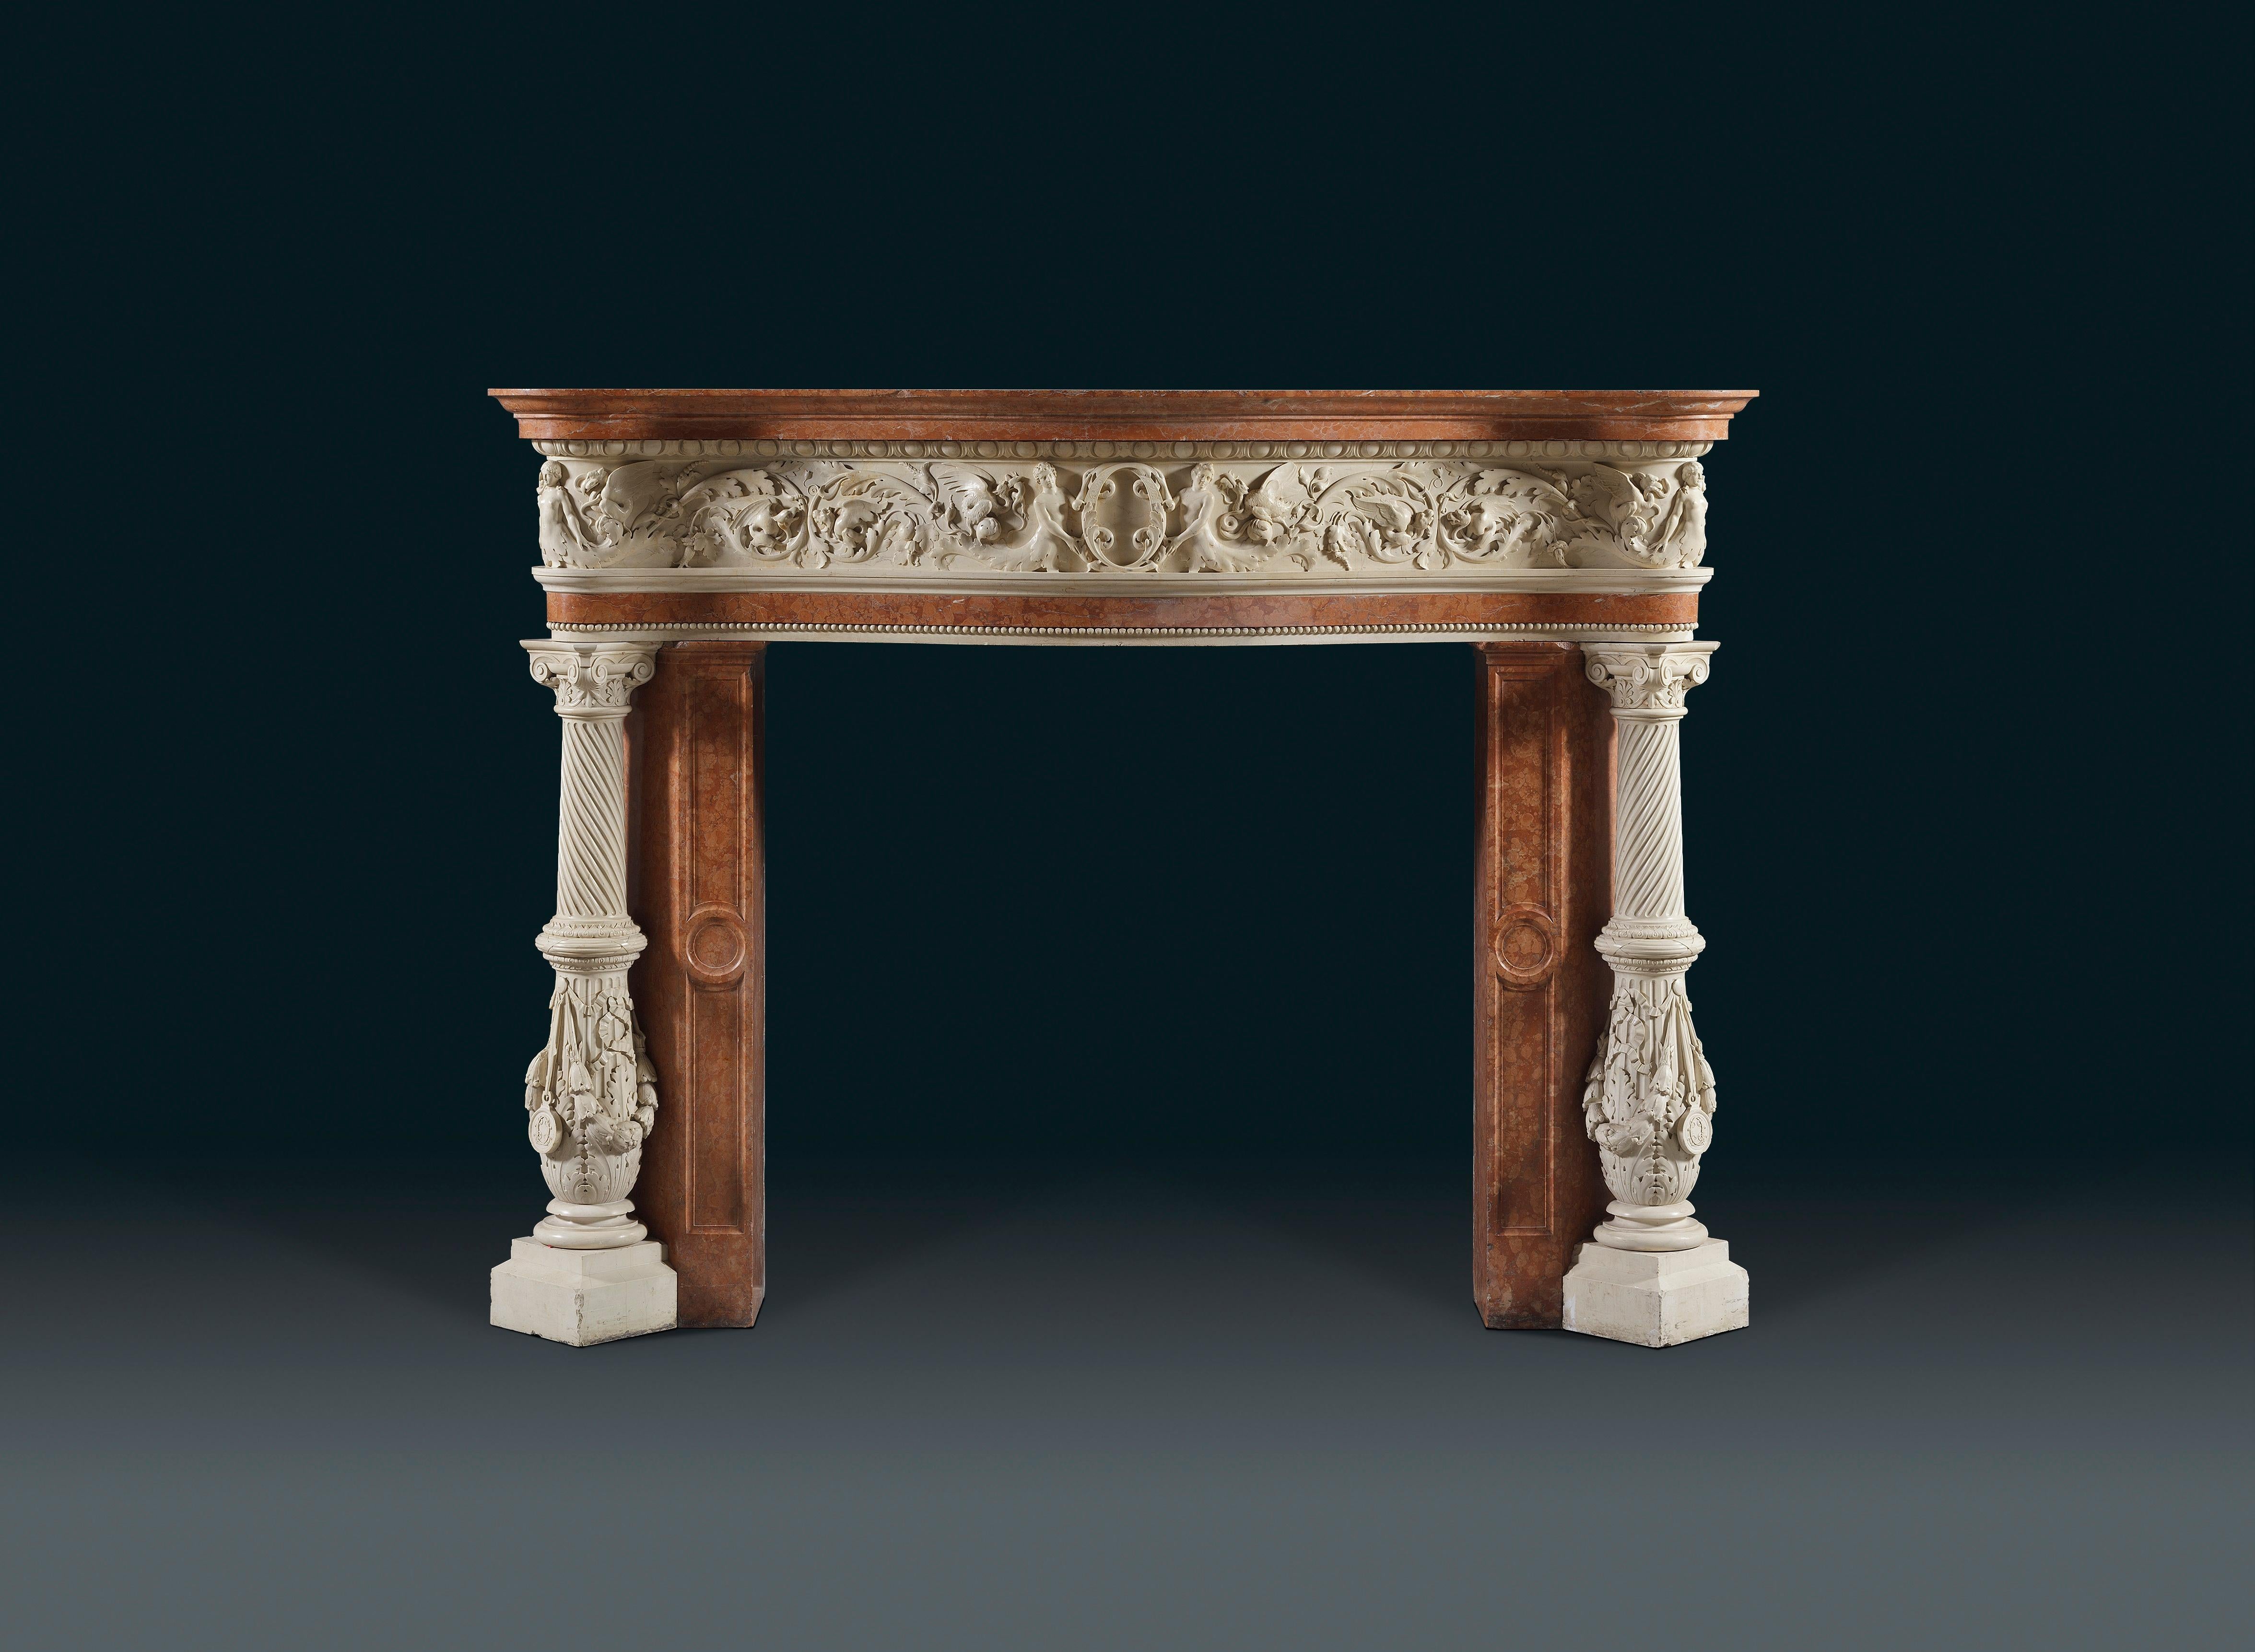 An Italian, Venetian, Renaissance style chimney piece in statuary and Rosso Verona marbles. With serpentine shelf above the statuary curved frieze carved with a central cartouche upheld by two mermaids flanked by fabulous dragons and scrolling